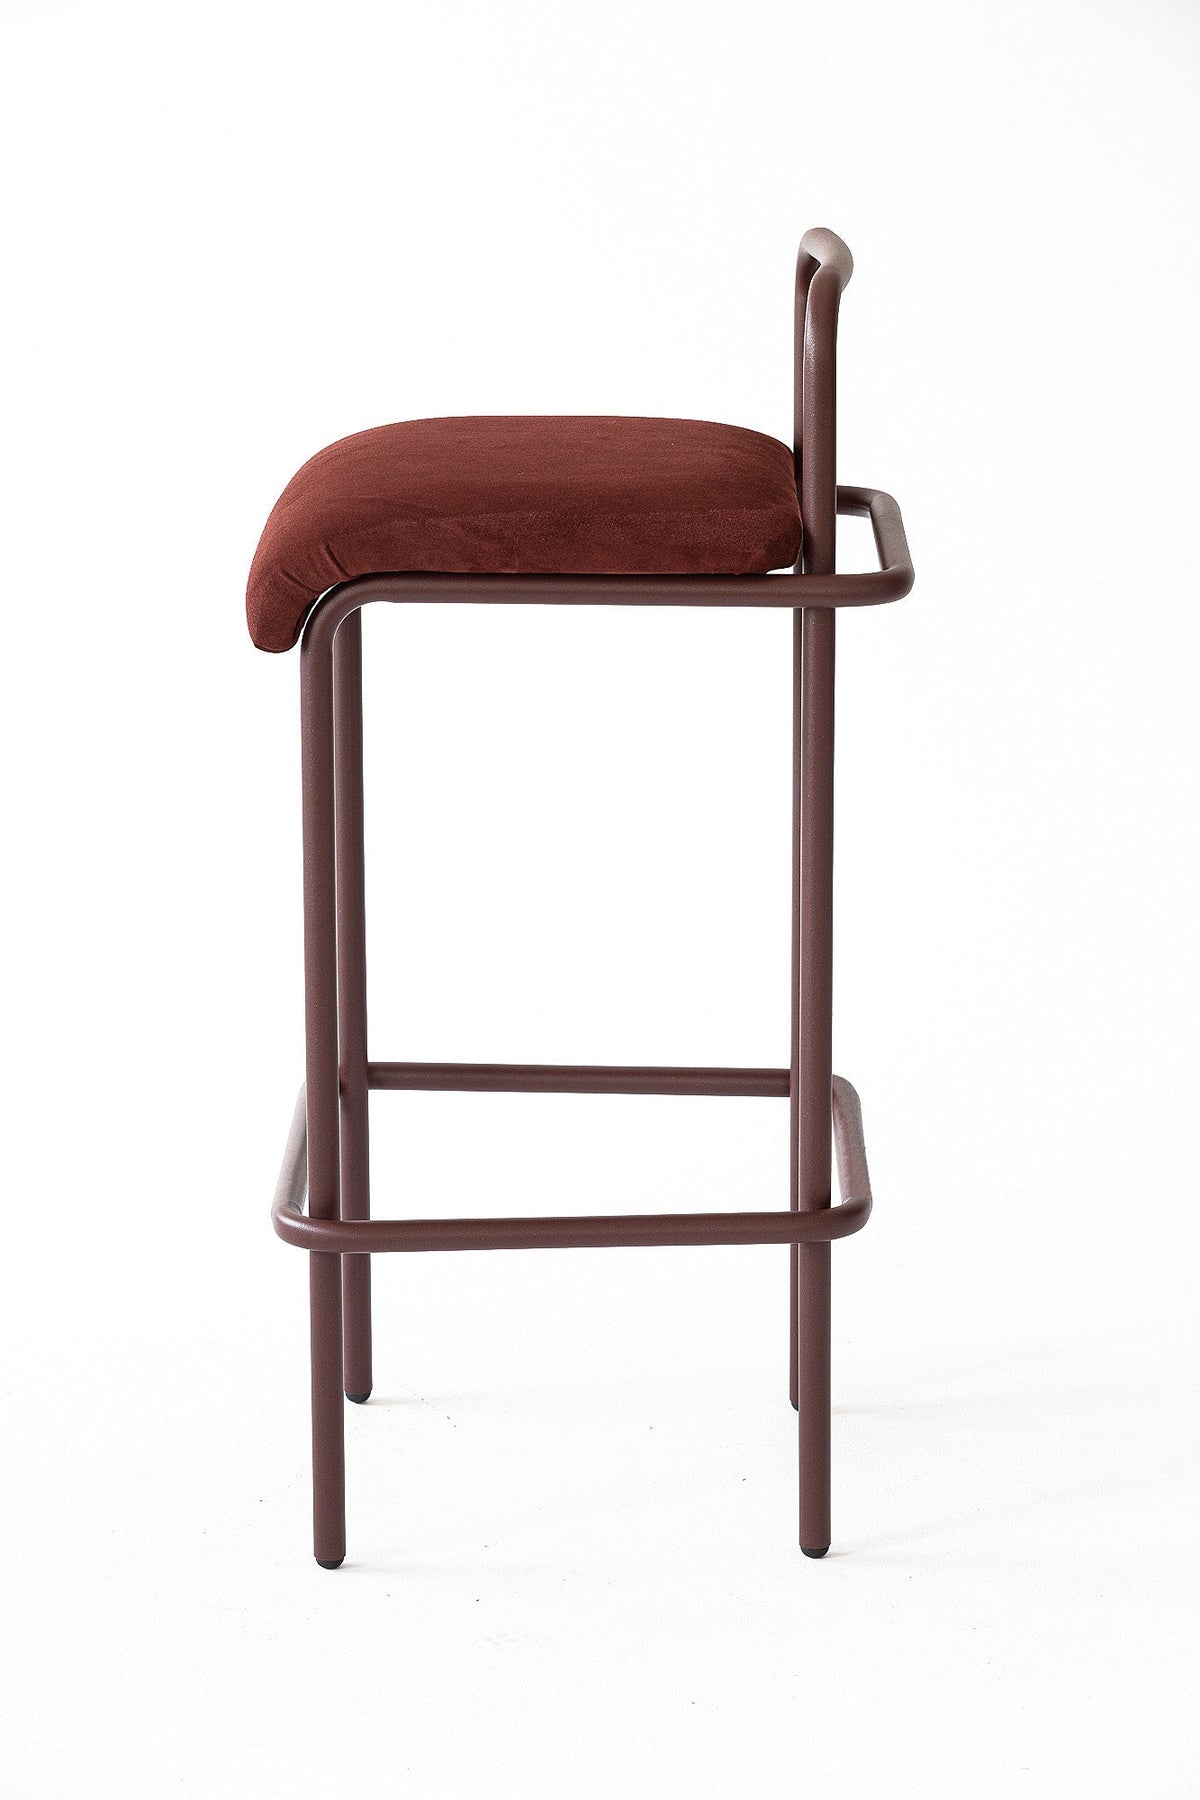 School Soft High Stool-Toposworkshop-Contract Furniture Store